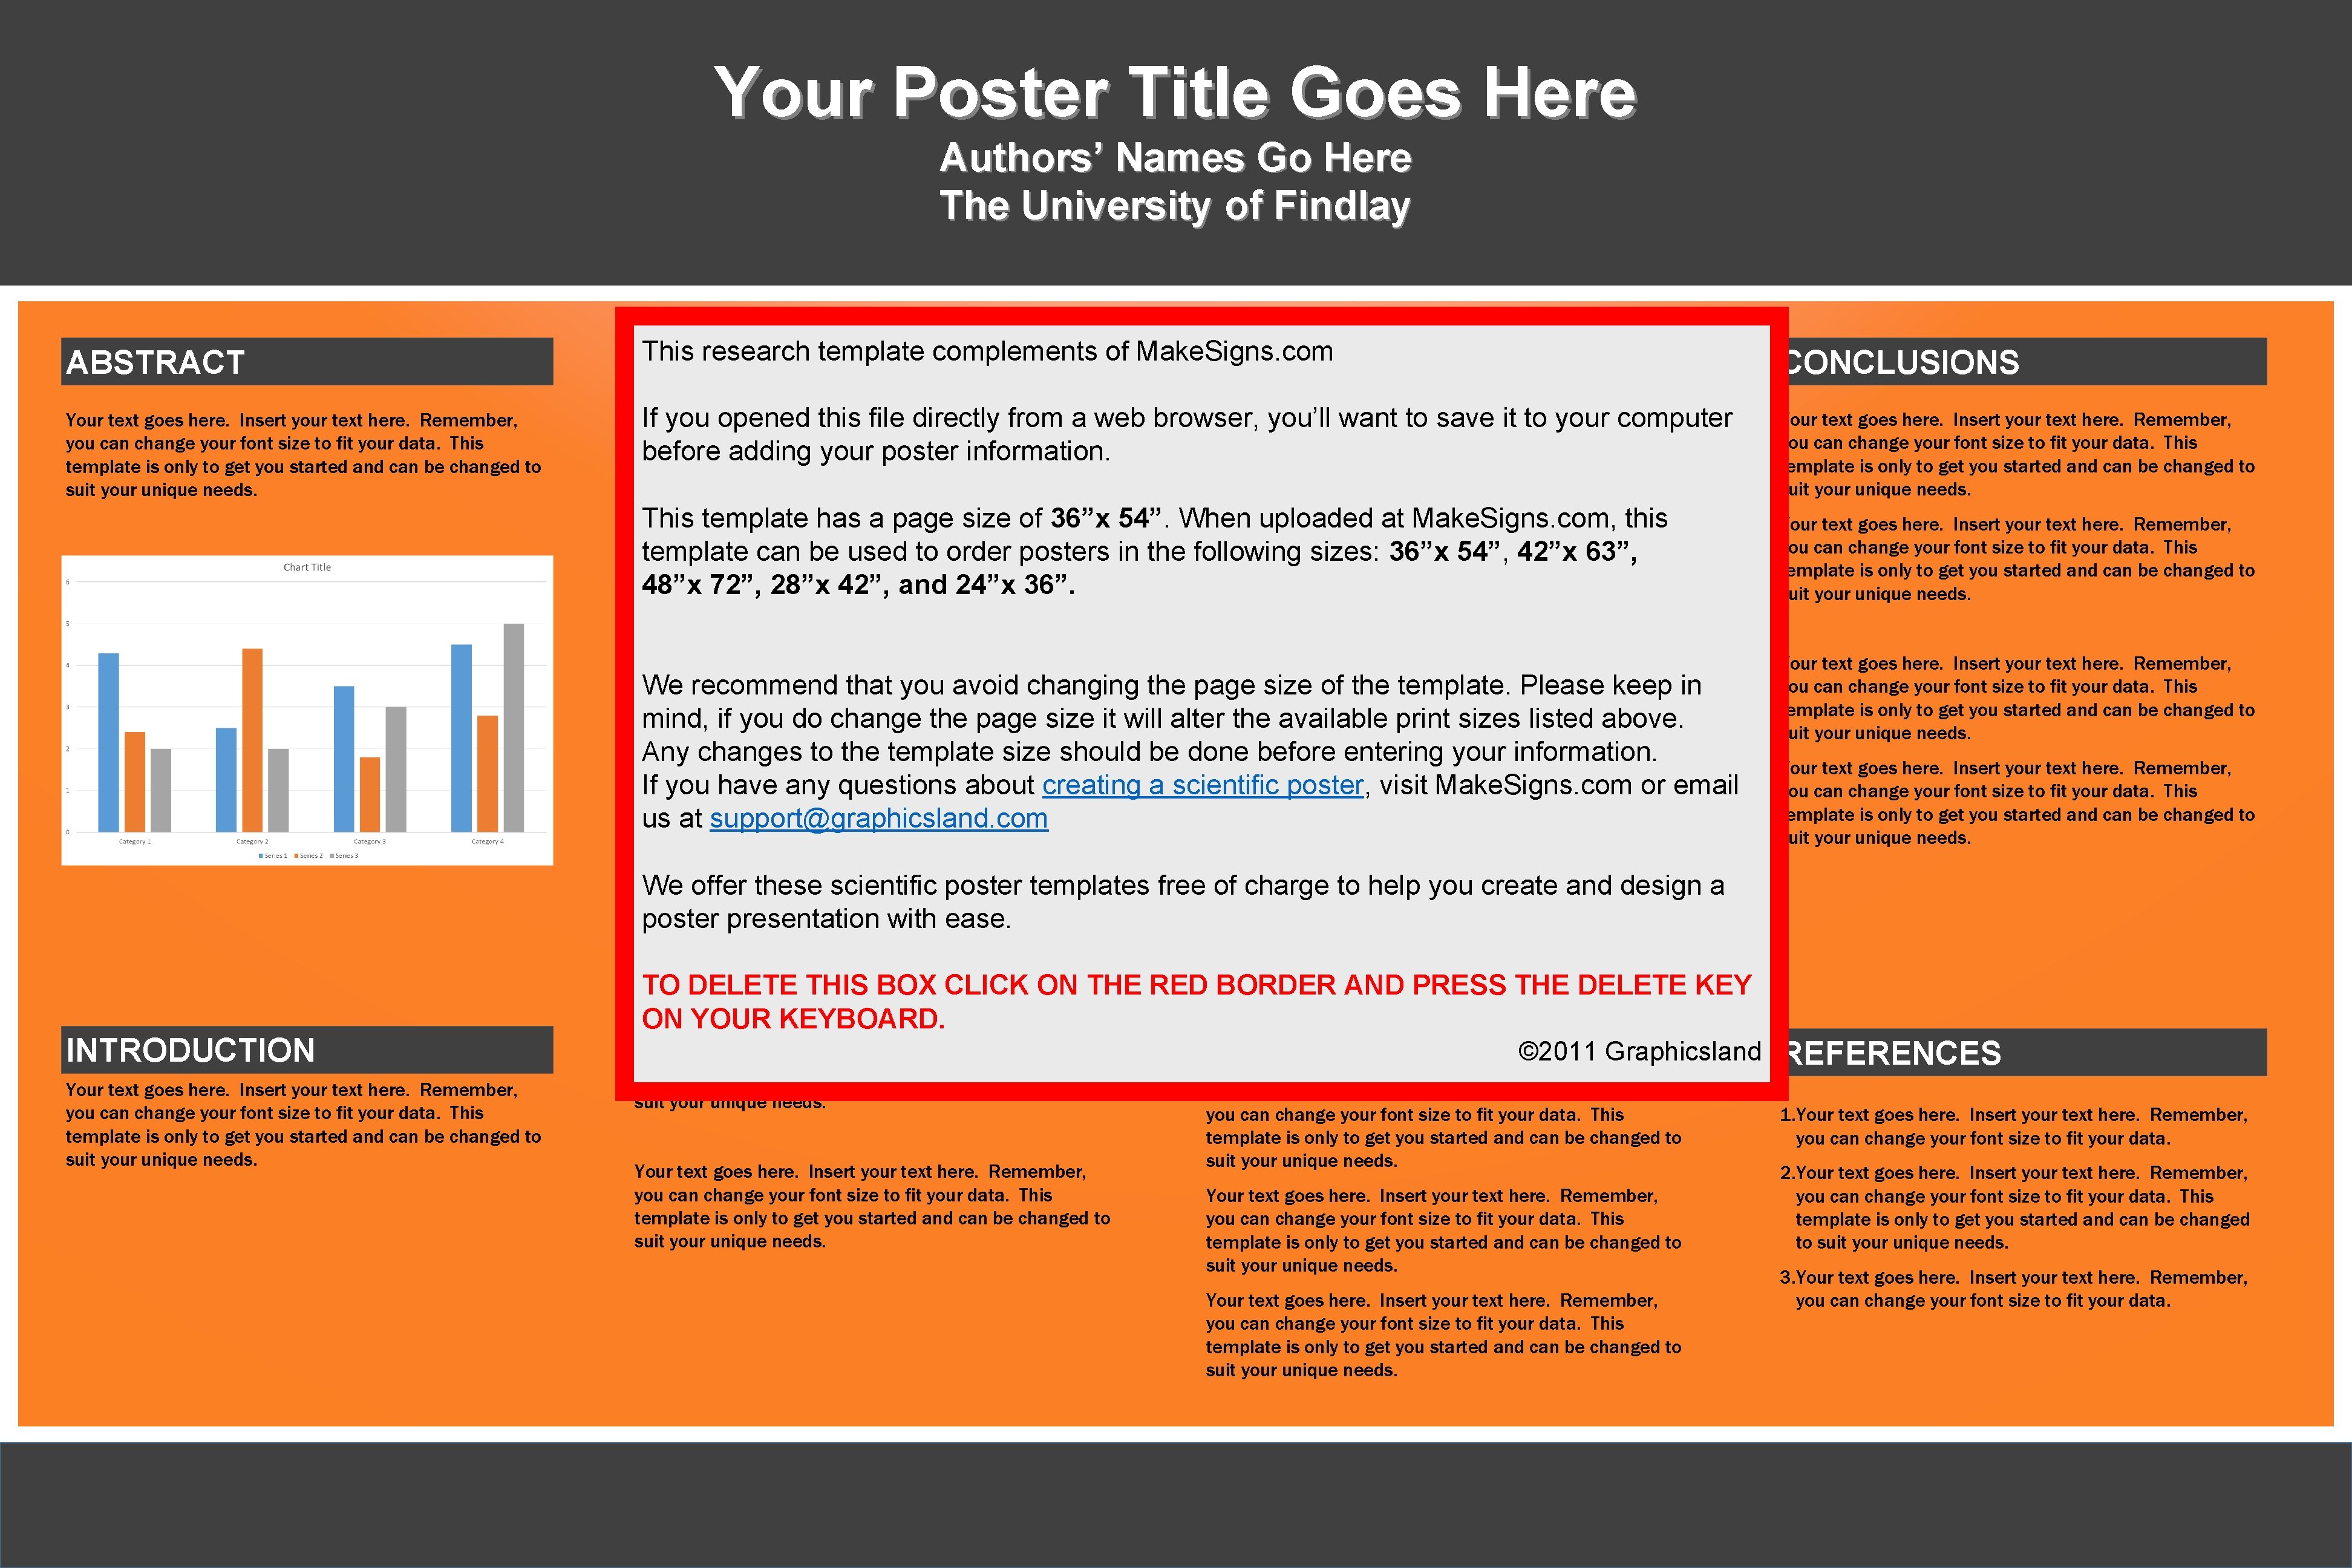 Your Poster Title Goes Here Authors’ Names Go Here The University of Findlay ABSTRACT